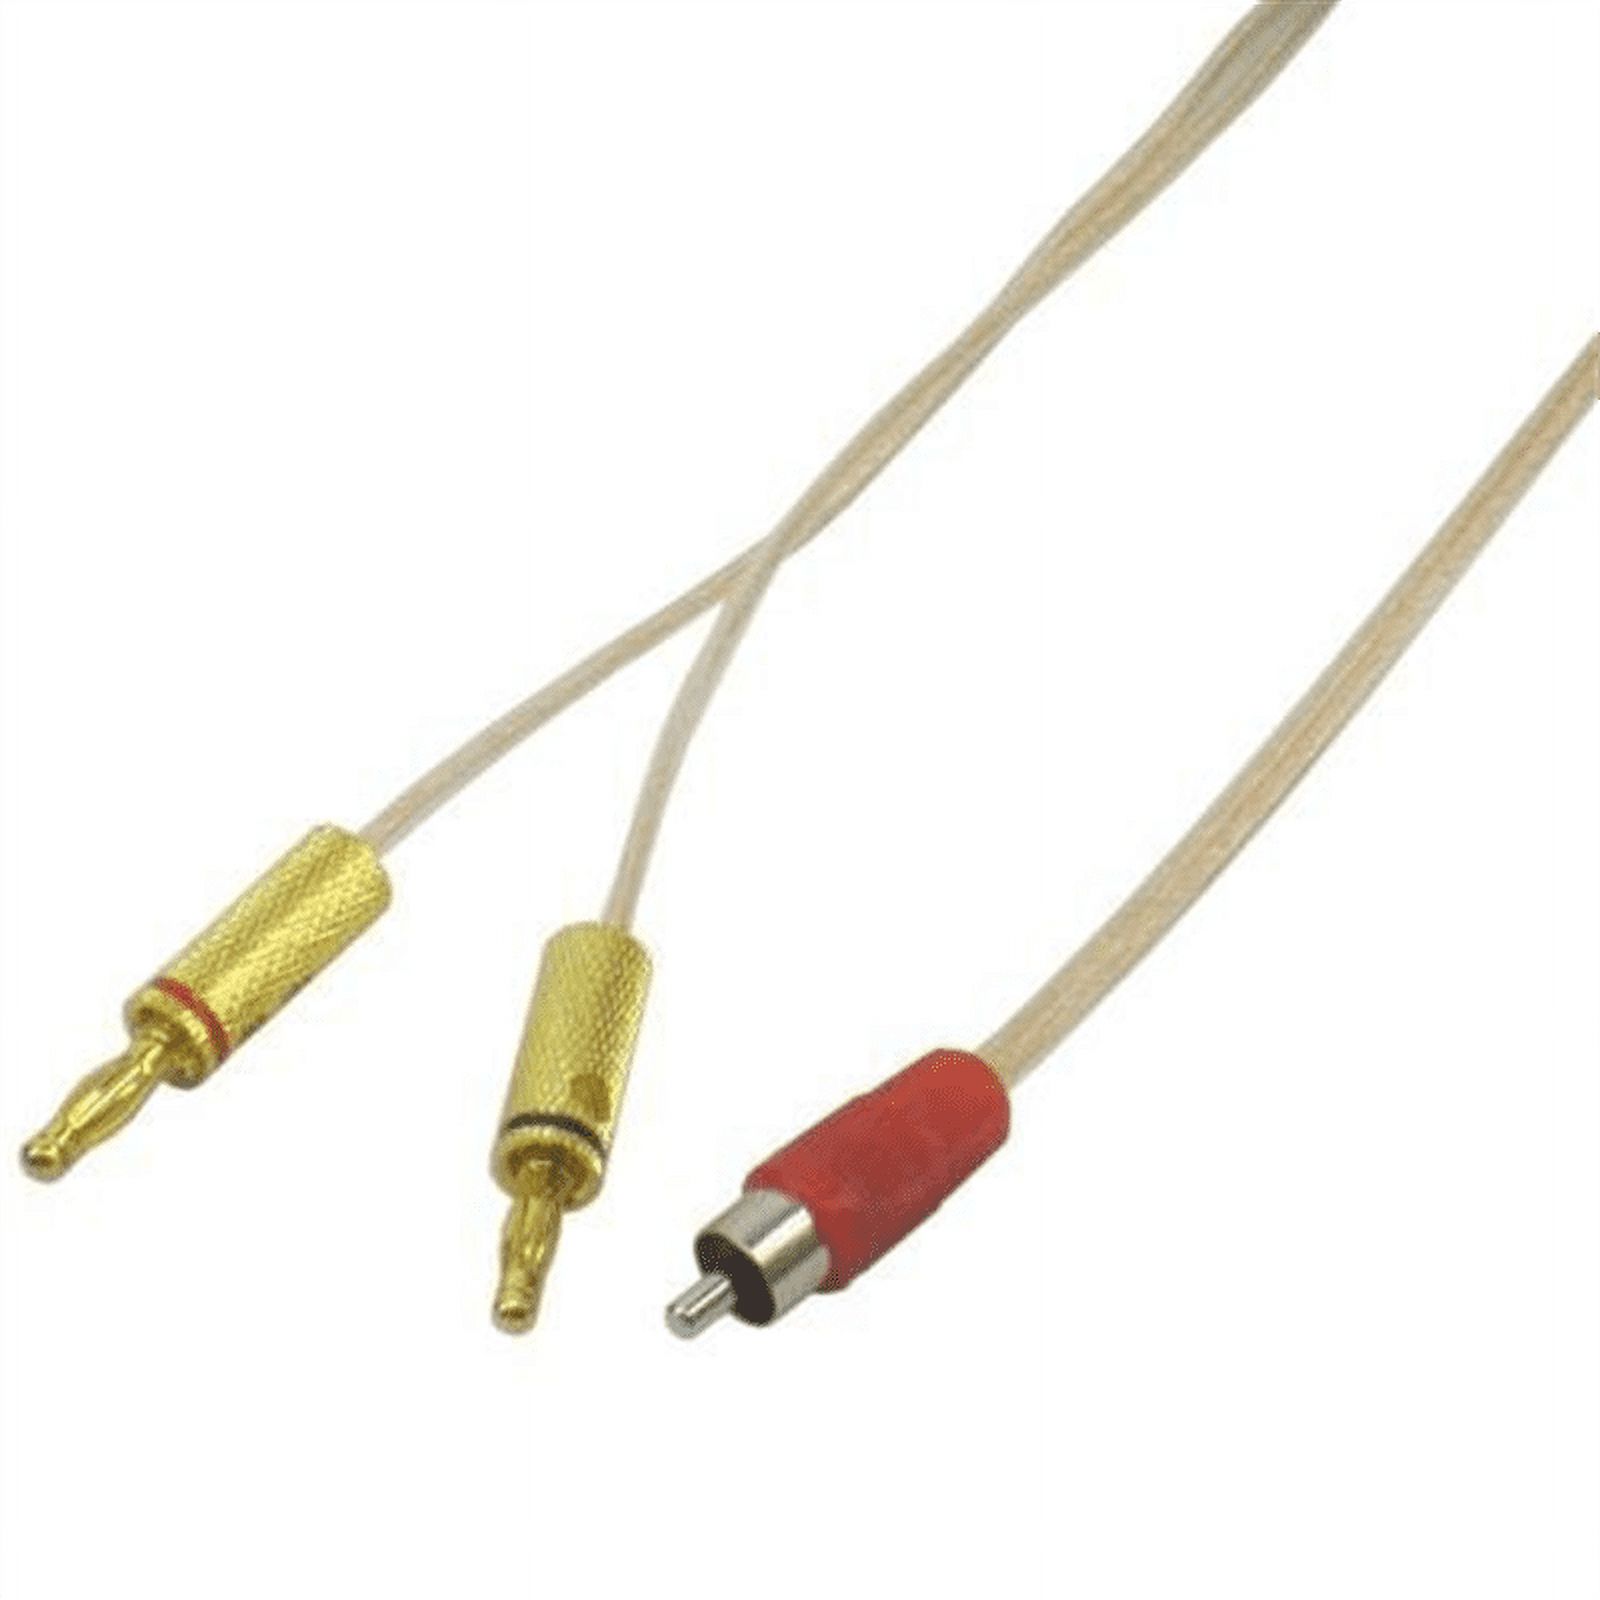 IEC L74252-06 16 AWG Speaker wire with RCA Male Red to 1 pair Banana Plugs 6' - image 1 of 1